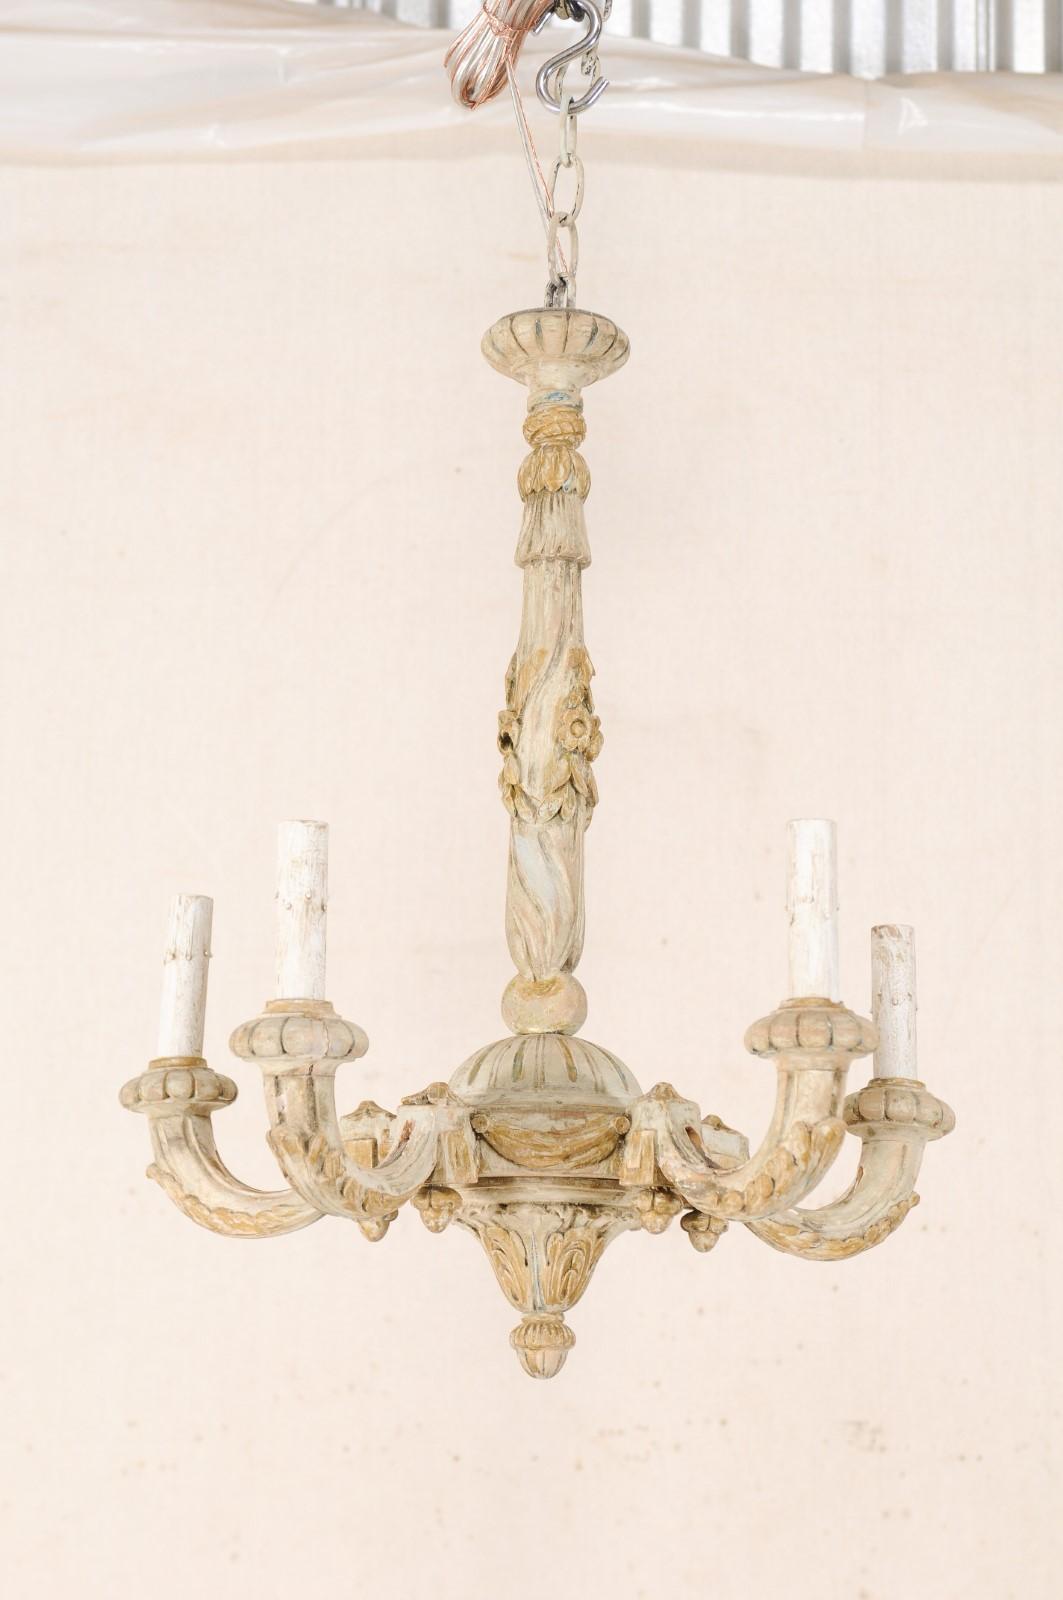 Hand-Carved French Five-Light Carved Wood Chandelier with Floral & Foliage Motif, Cute Size